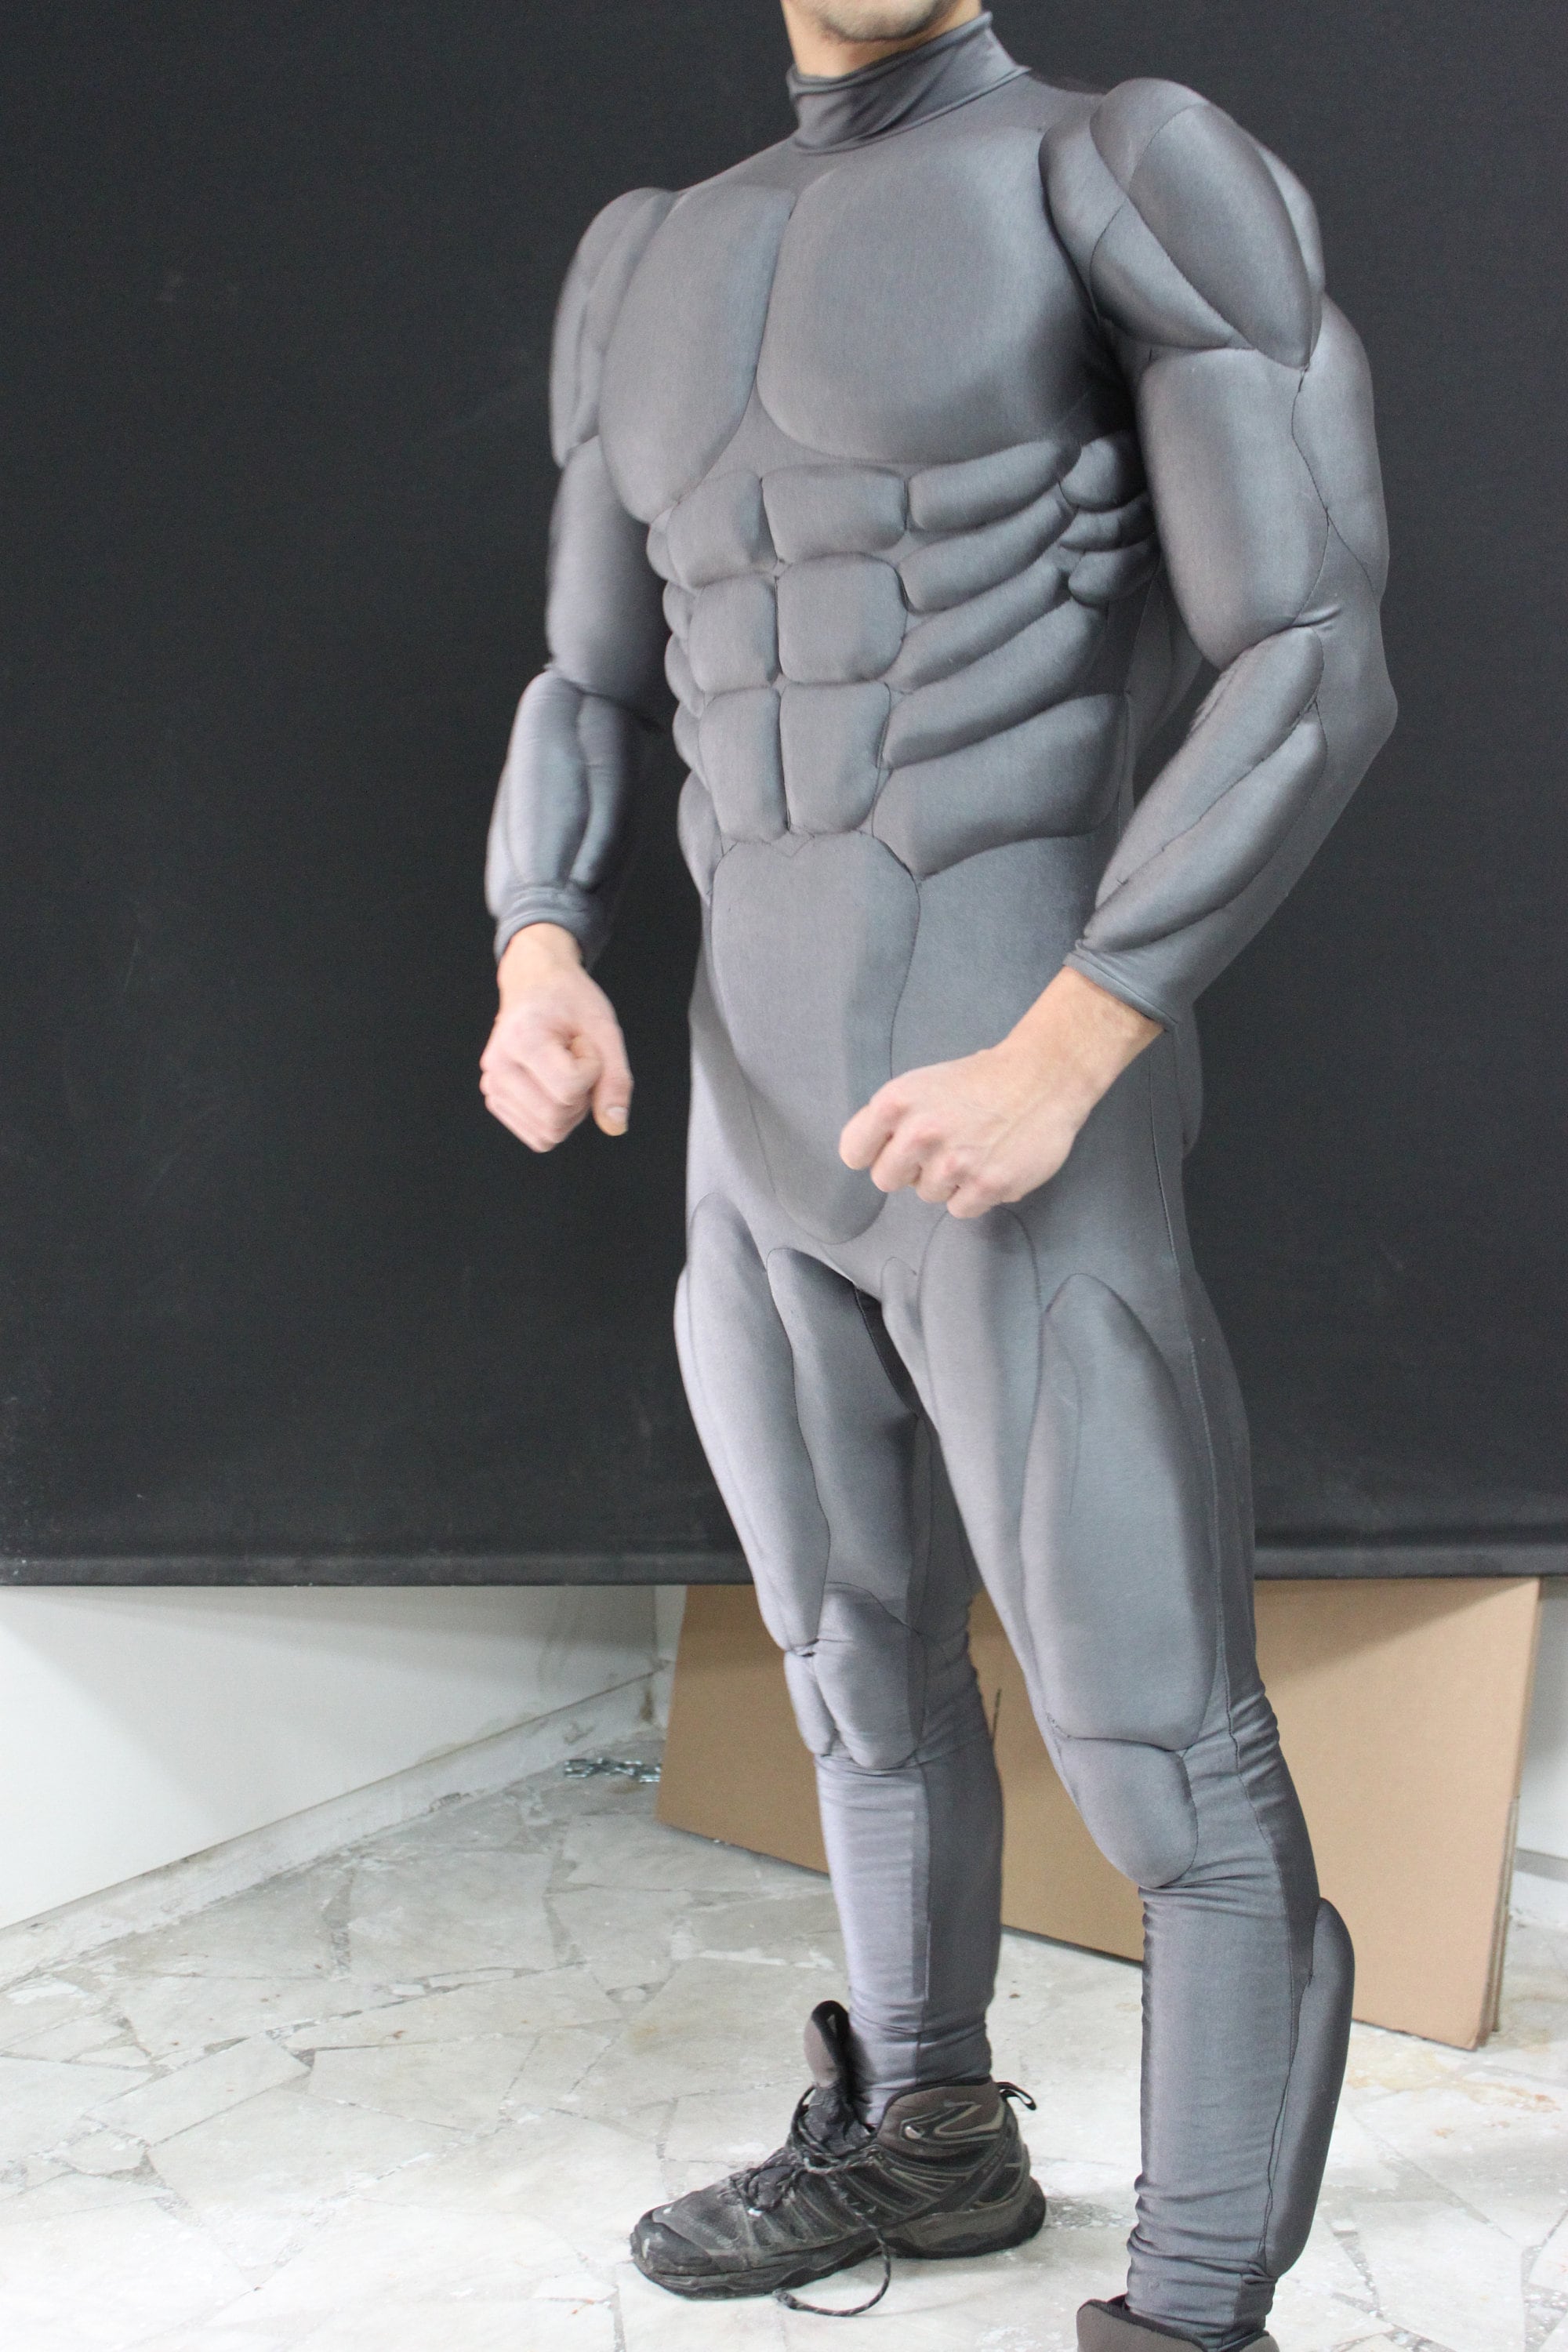 Buy Muscle Suit Online In India -  India